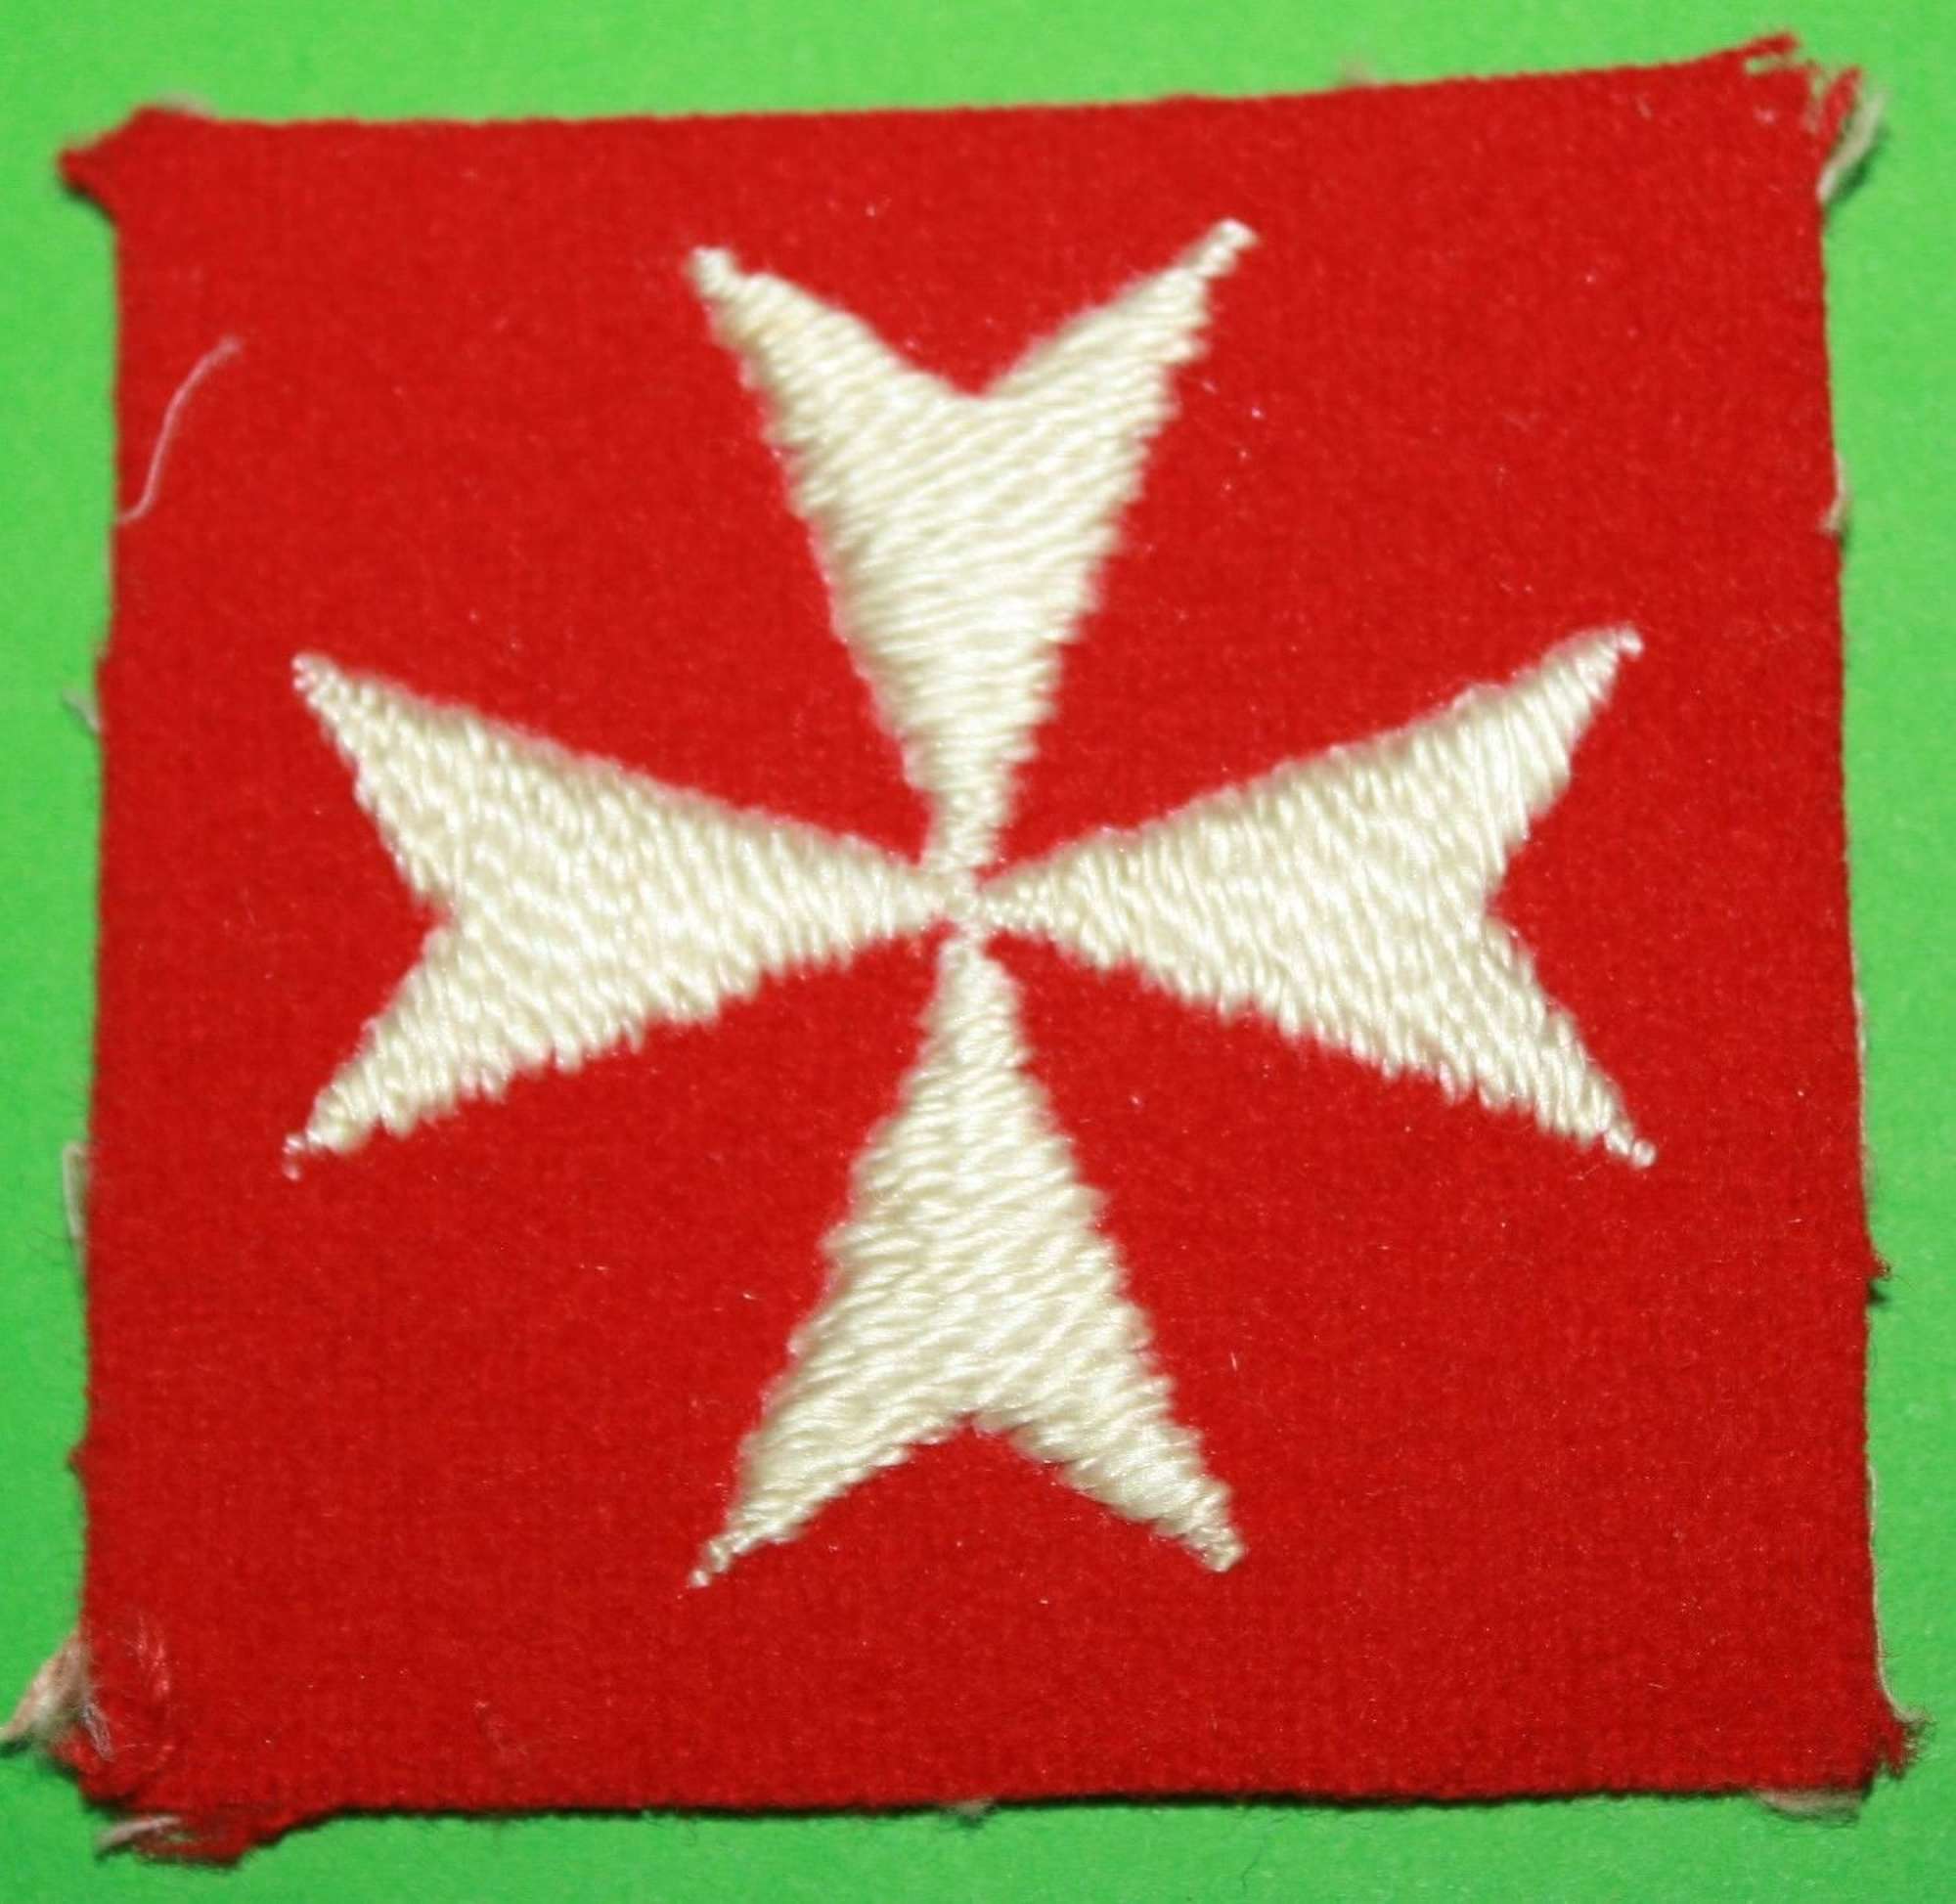 A BRITISH TROOPS MALTA FORMATION PATCH